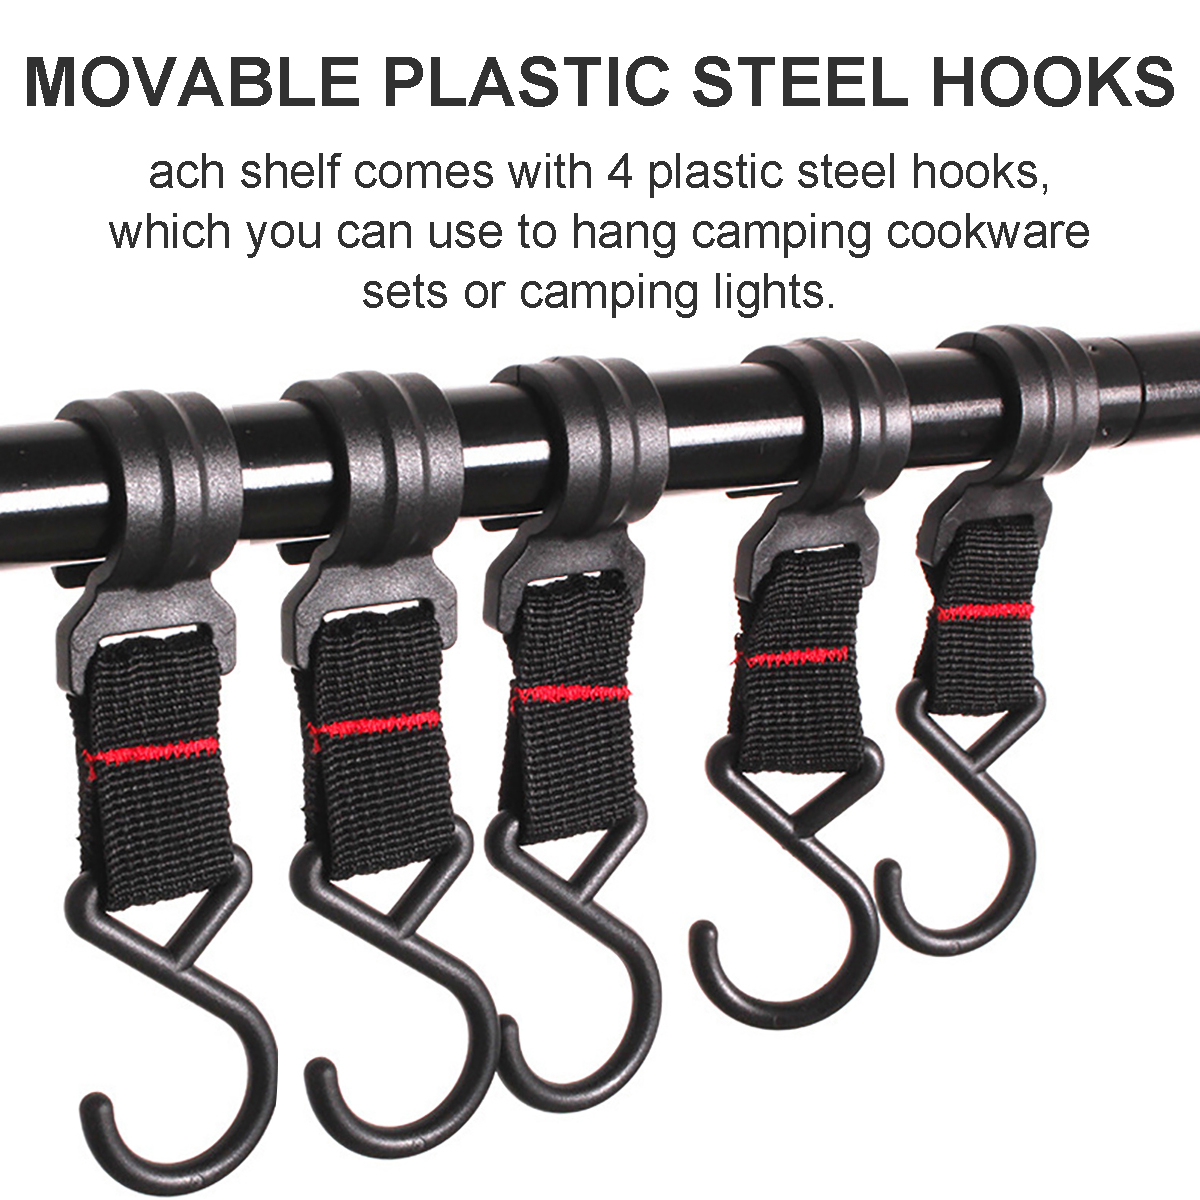 Ultralight-Hanging-Rack-Folding-Cookware-Storage-Triangle-Racks-Clothes-Shelf-Up-to-8kg-Outdoor-Camp-1780193-3